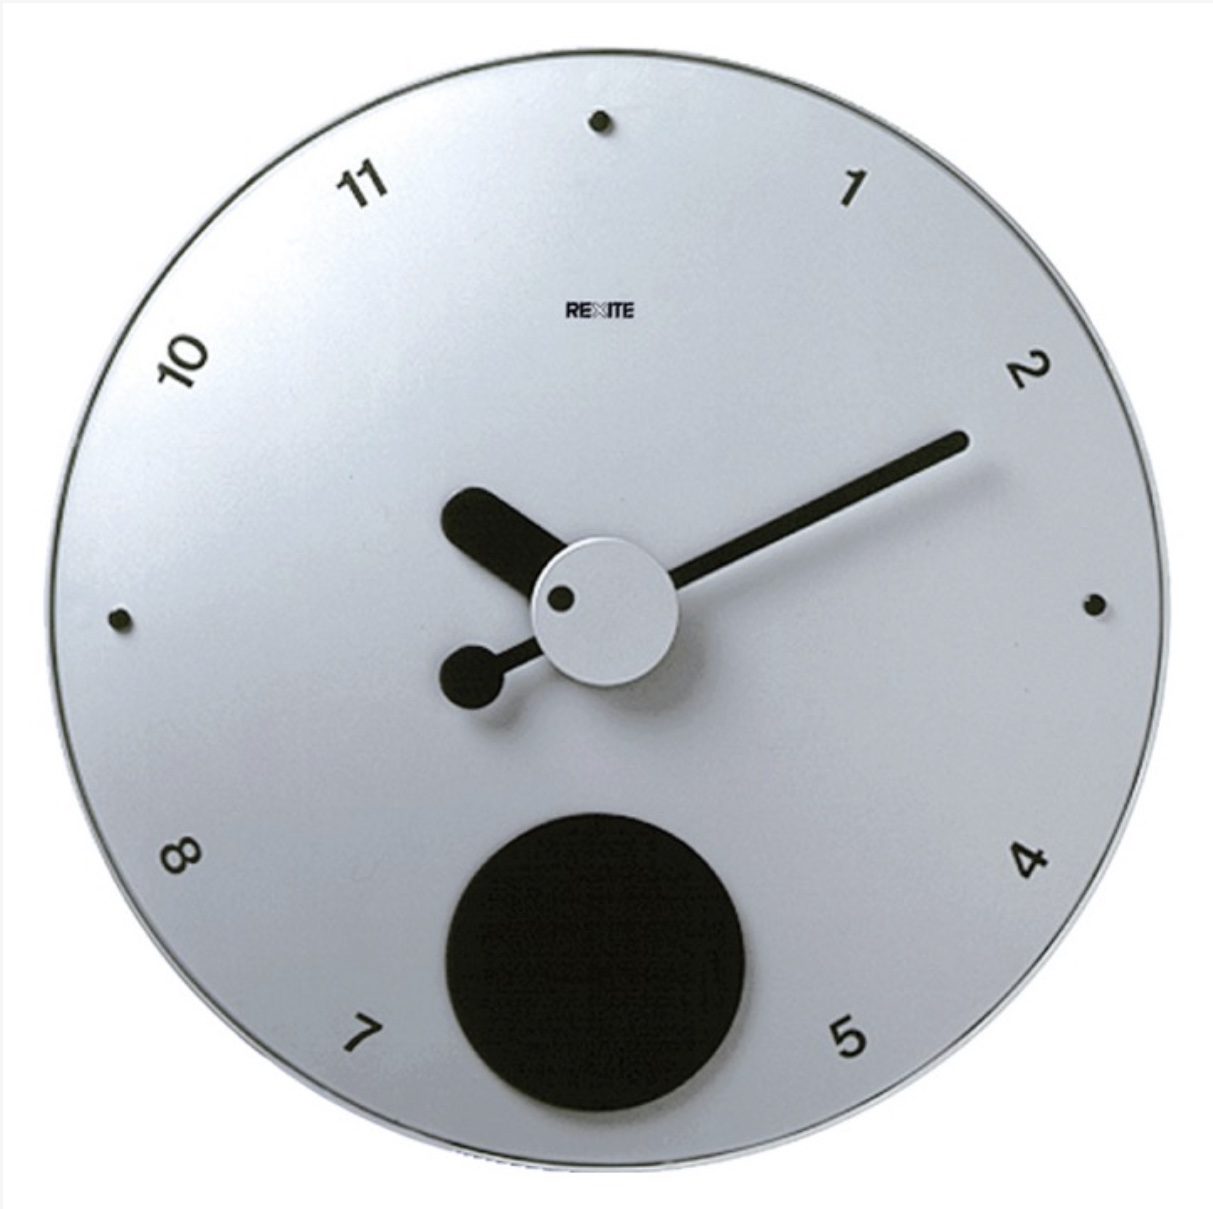 Wall clock CONTRATTEMPO AN.AN by Rexite